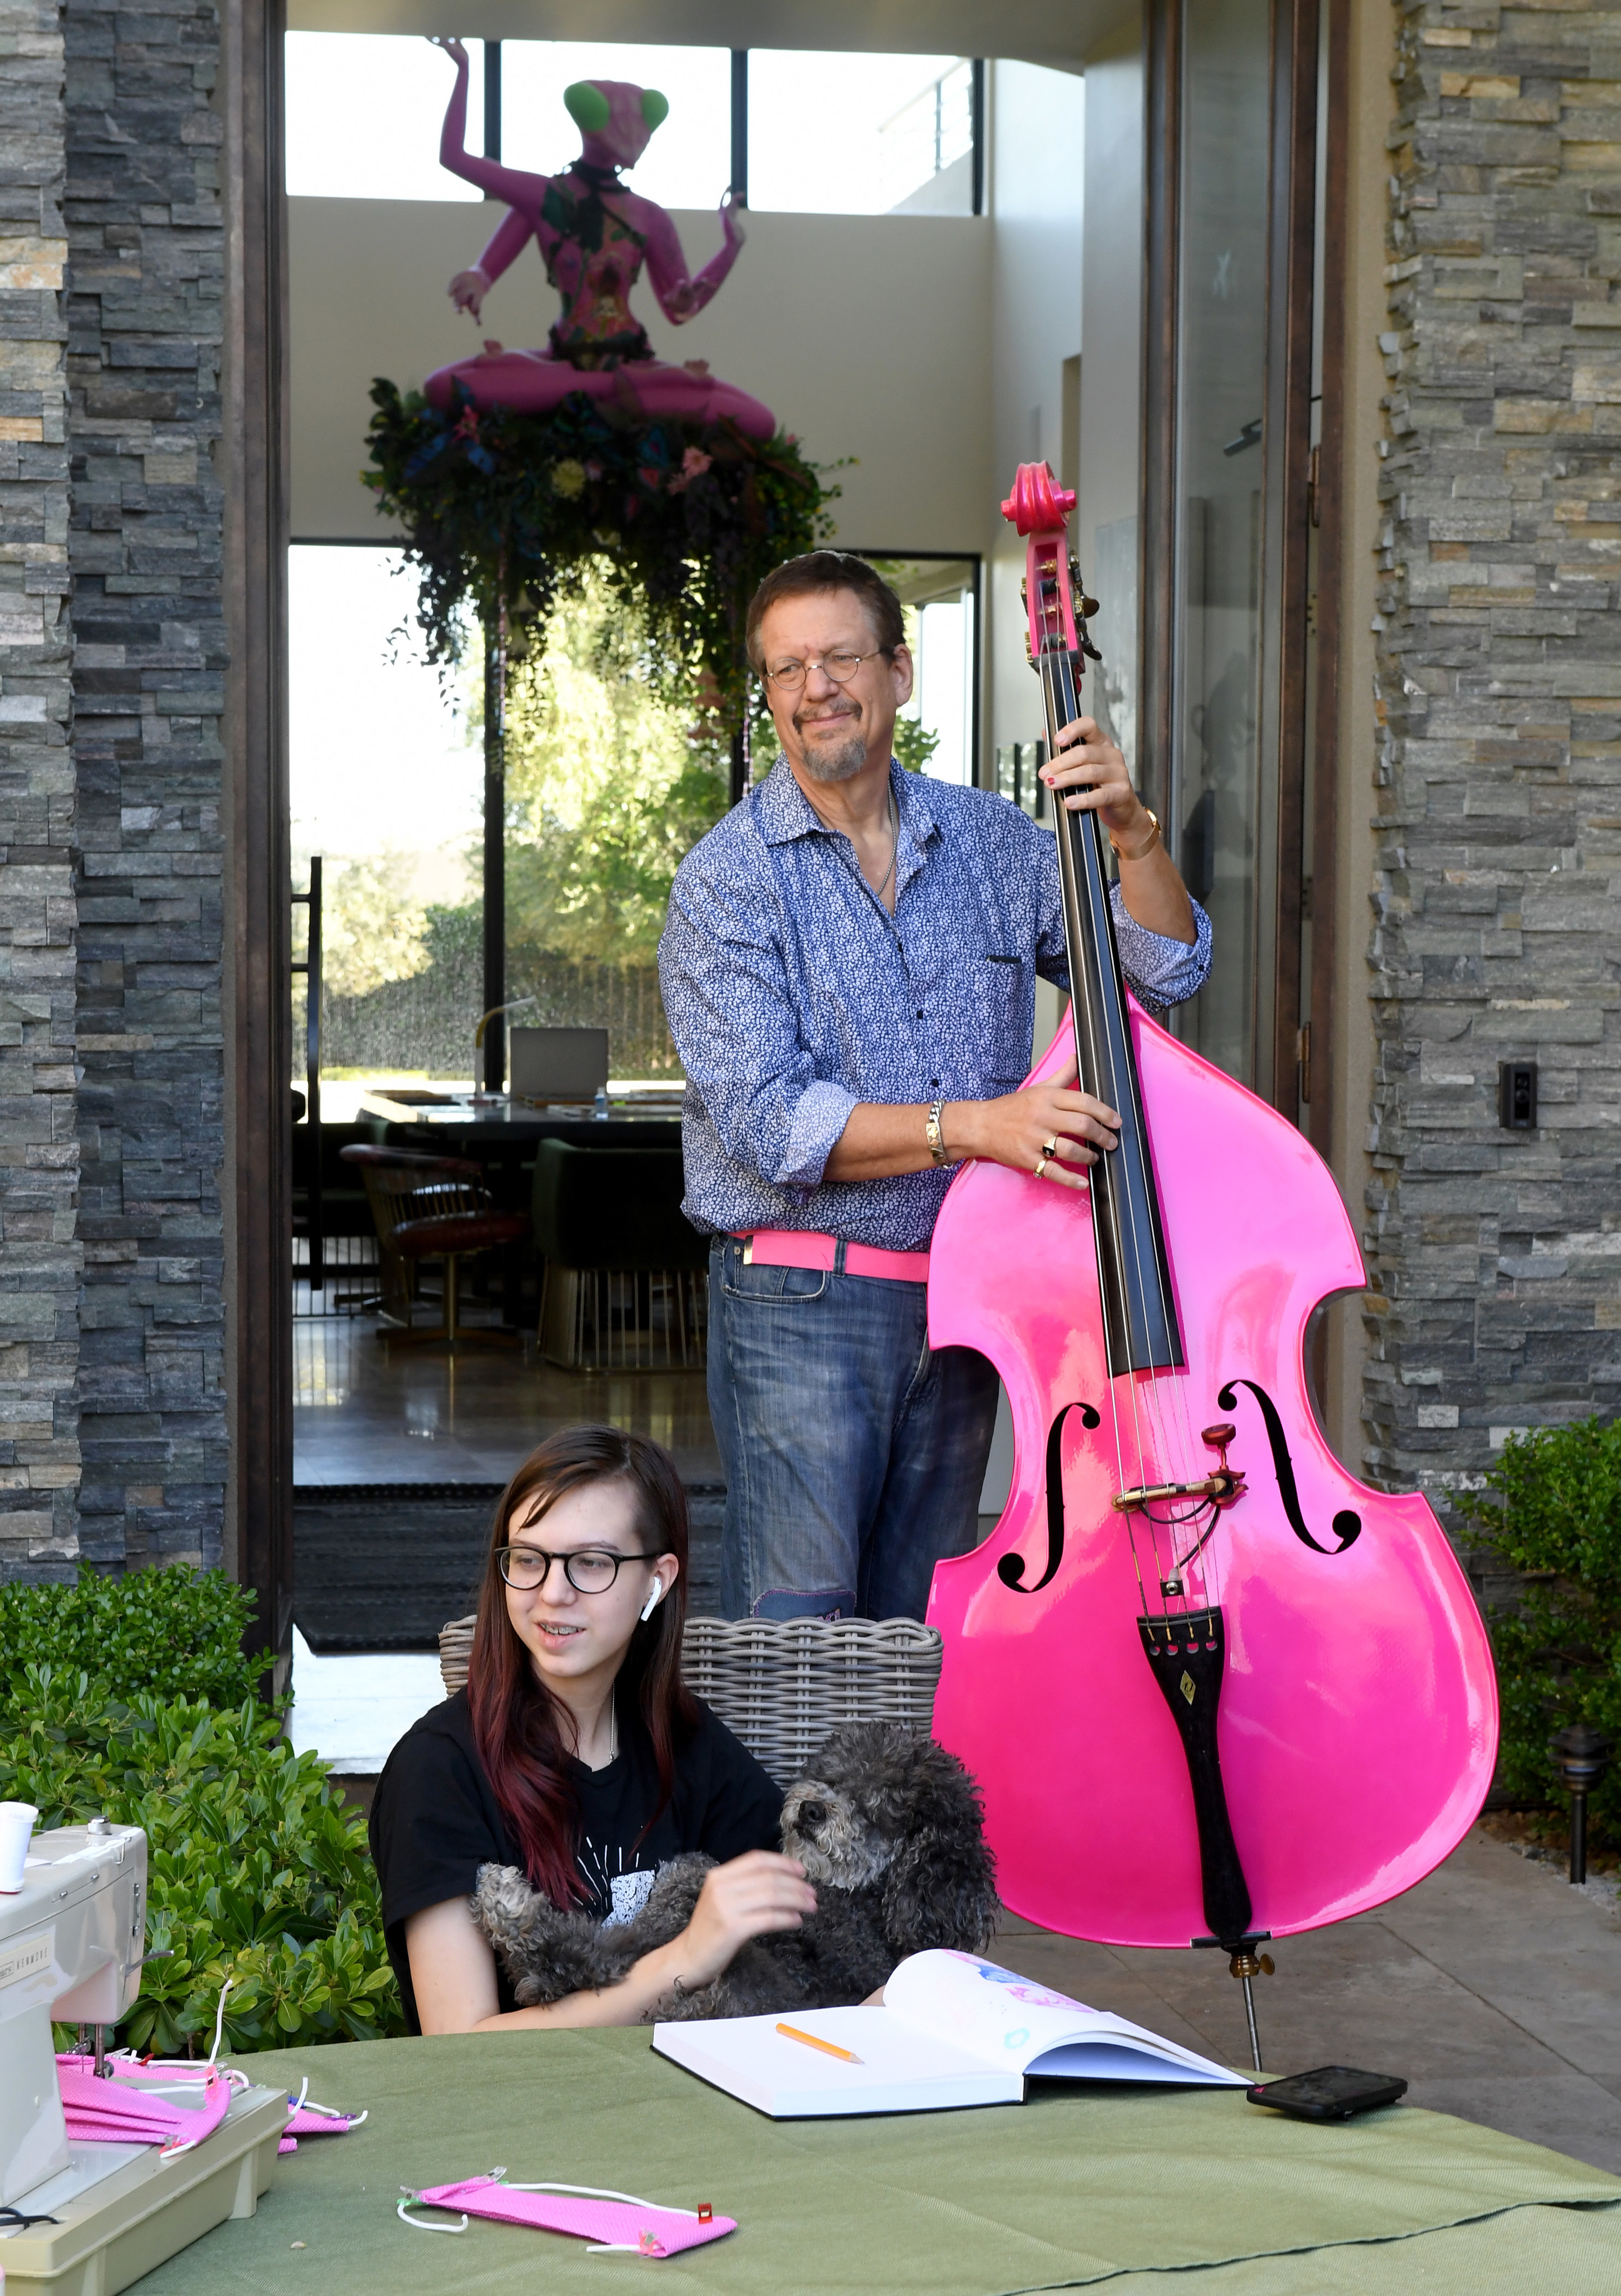 Penn Jillette (R) of the comedy/magic team Penn &amp;amp; Teller, plays a double bass as he and his daughter Moxie CrimeFighter Jillette, holding their dog Betsy